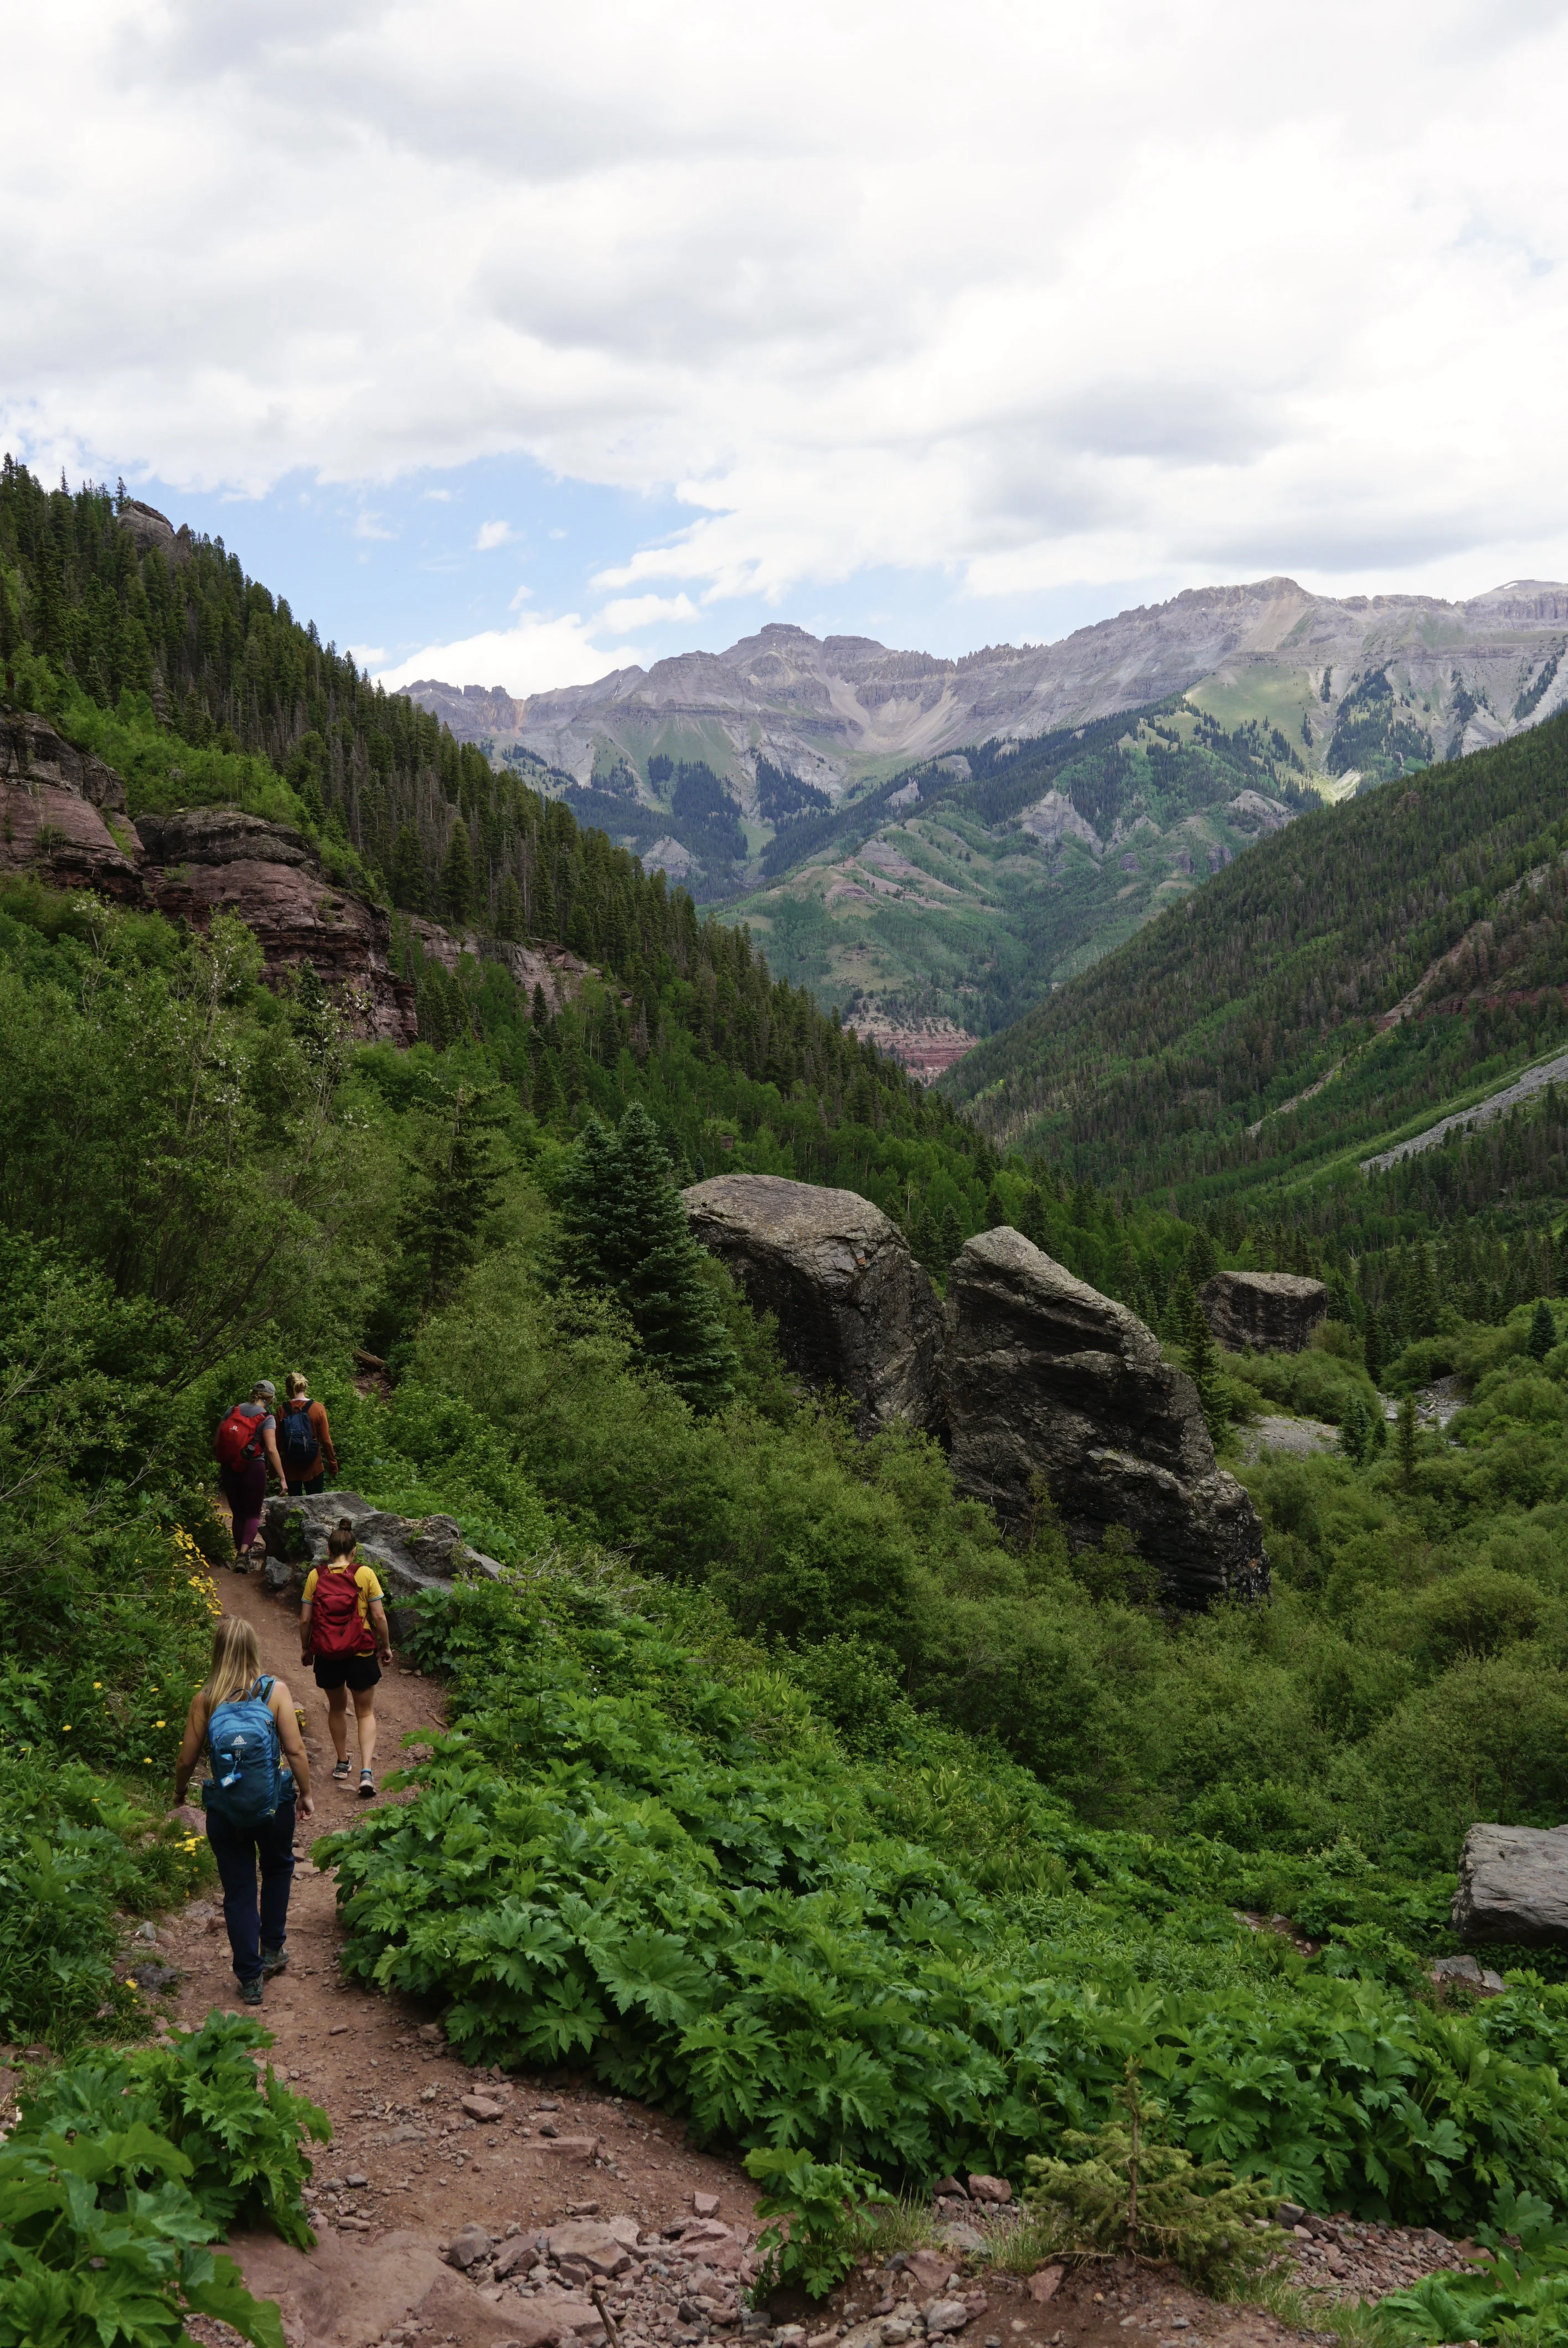 Hikers sharing the trail through the mountains.